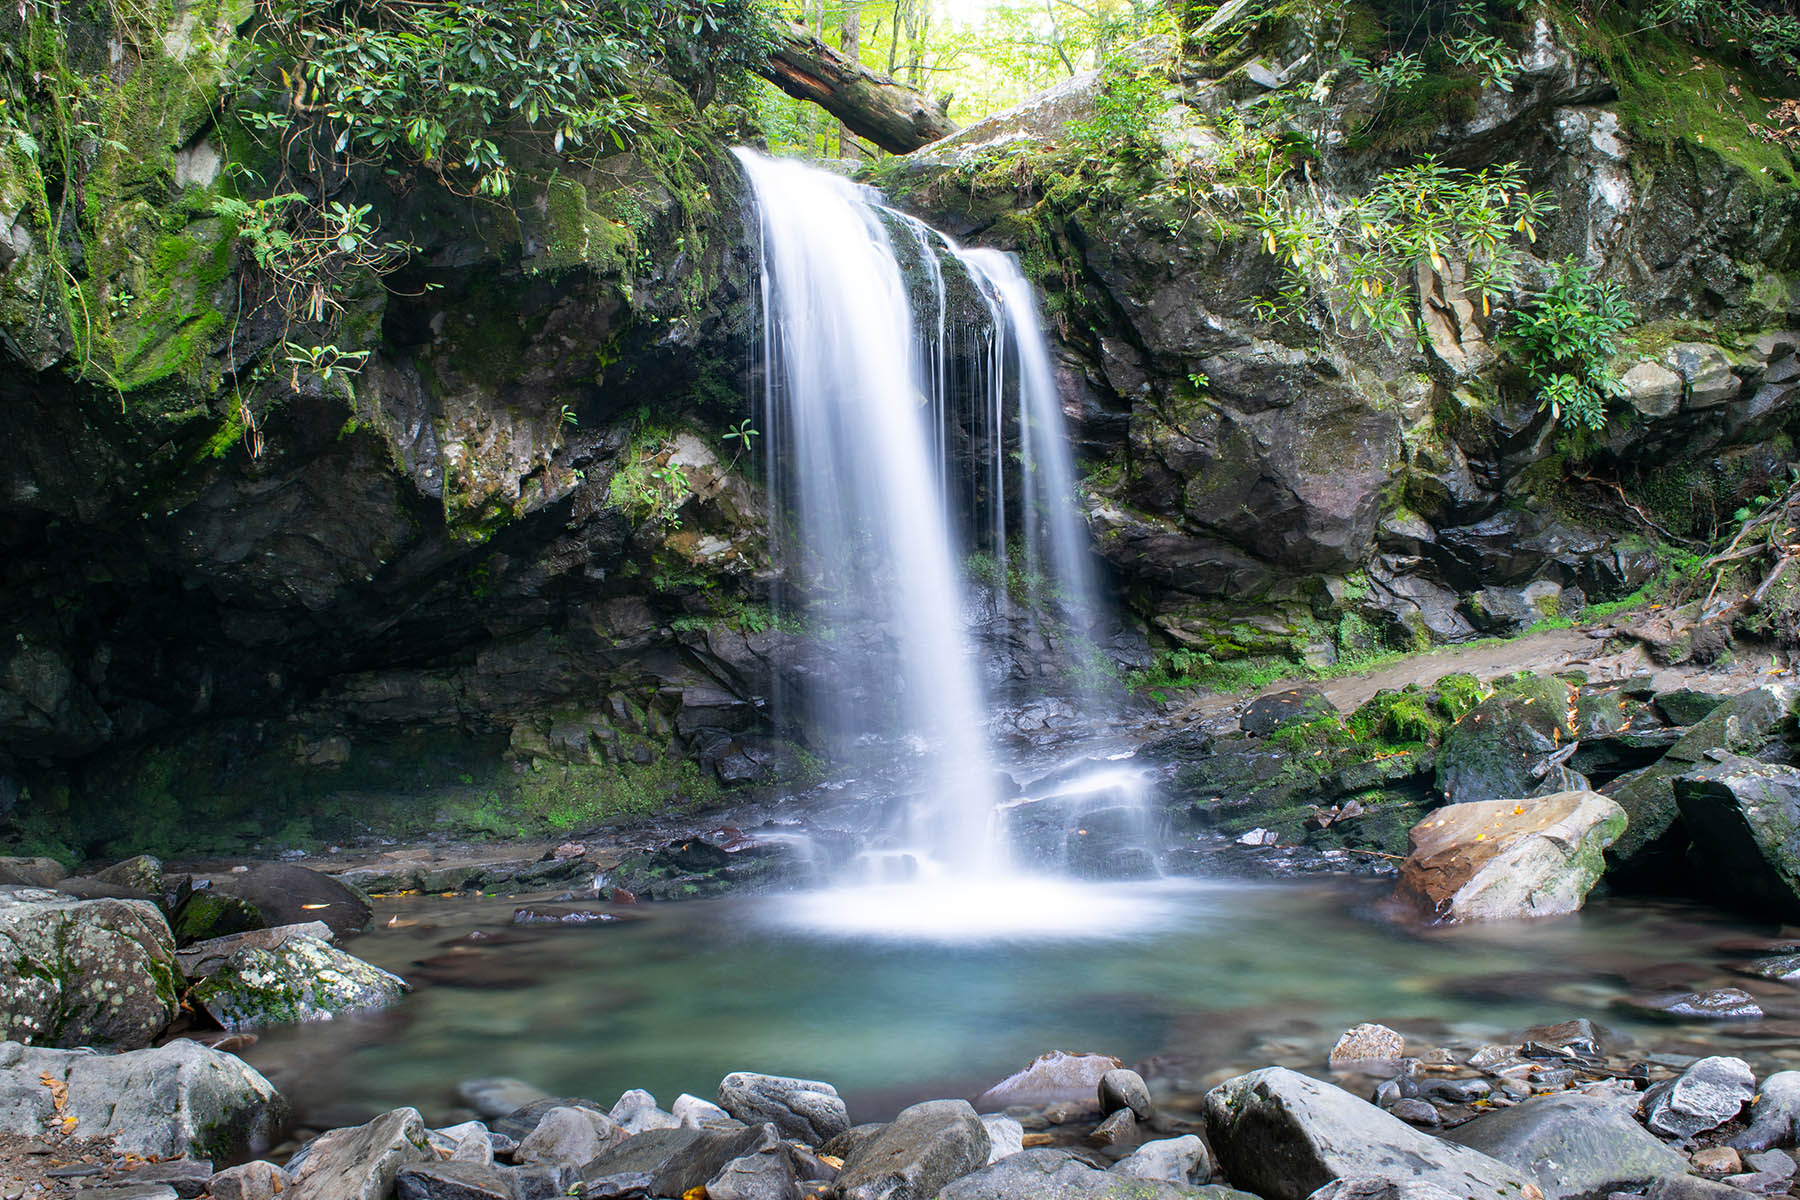 Chasing Waterfalls: A Tour of the Smoky Mountains’ Most Majestic Falls